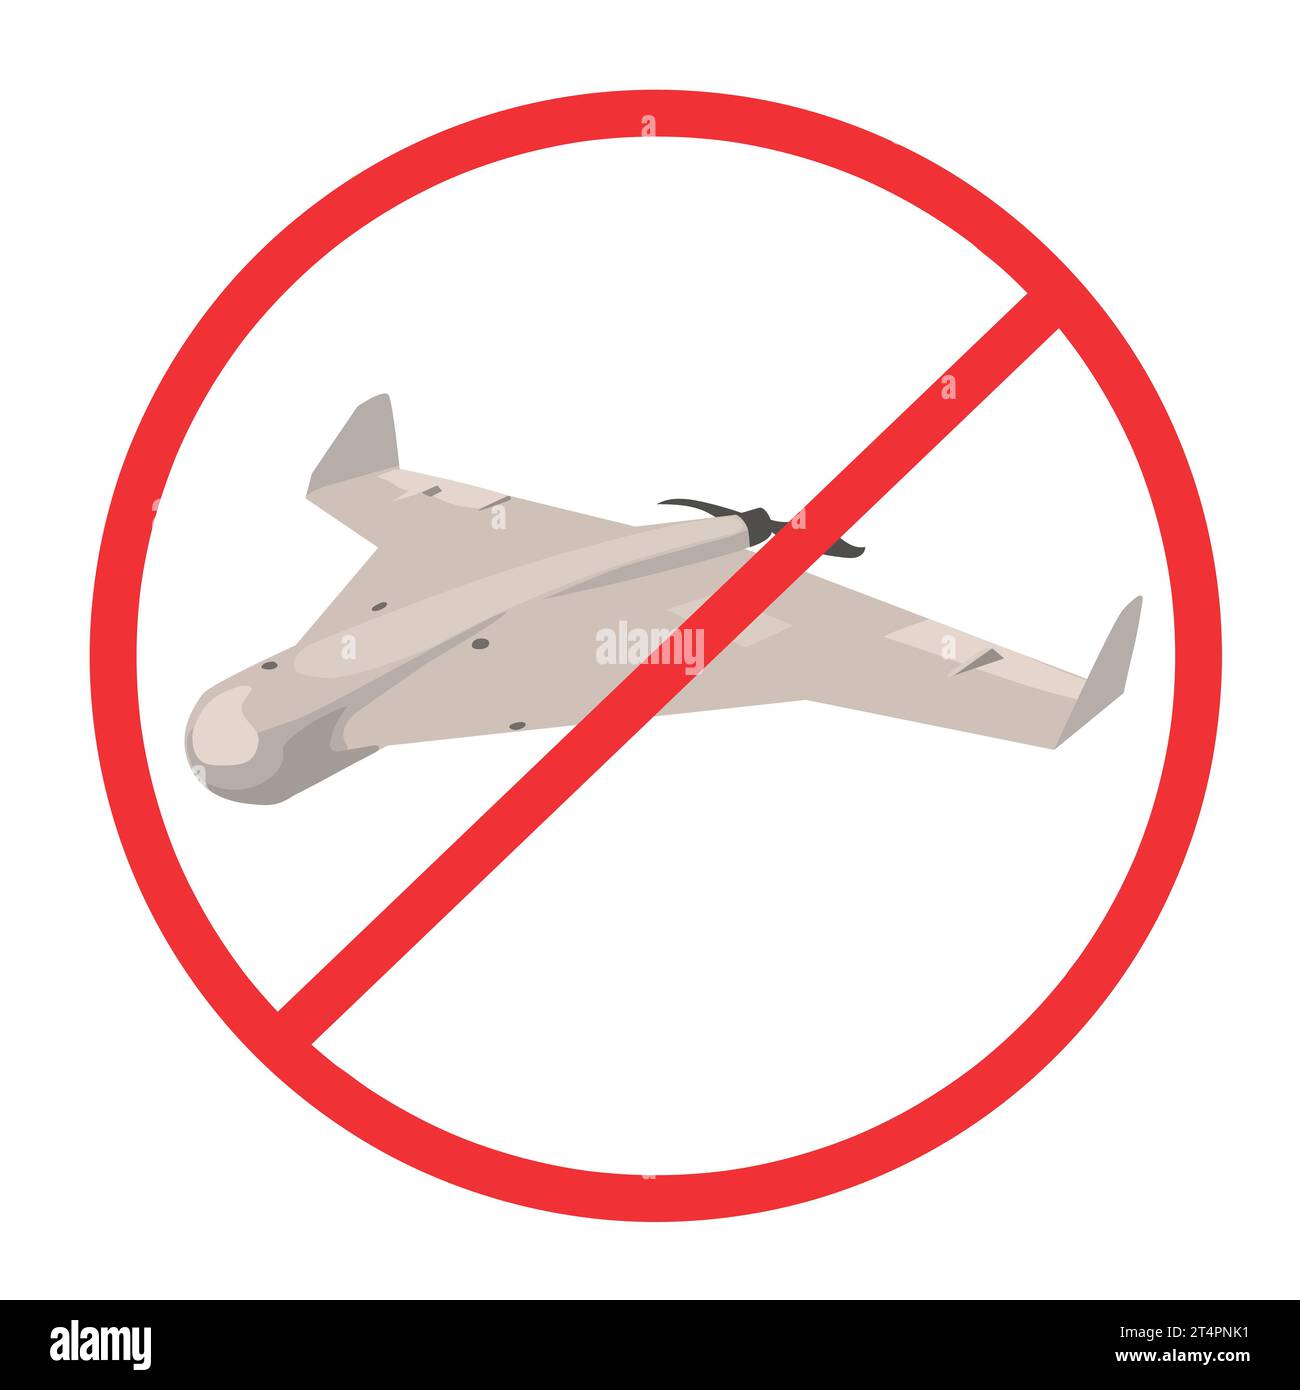 Iranian Drone kamikaze Shahed 136 with a crossed out sign. Prohibition sign with Drone kamikaze vector illustration.No sign Terrorist destruction Stock Vector